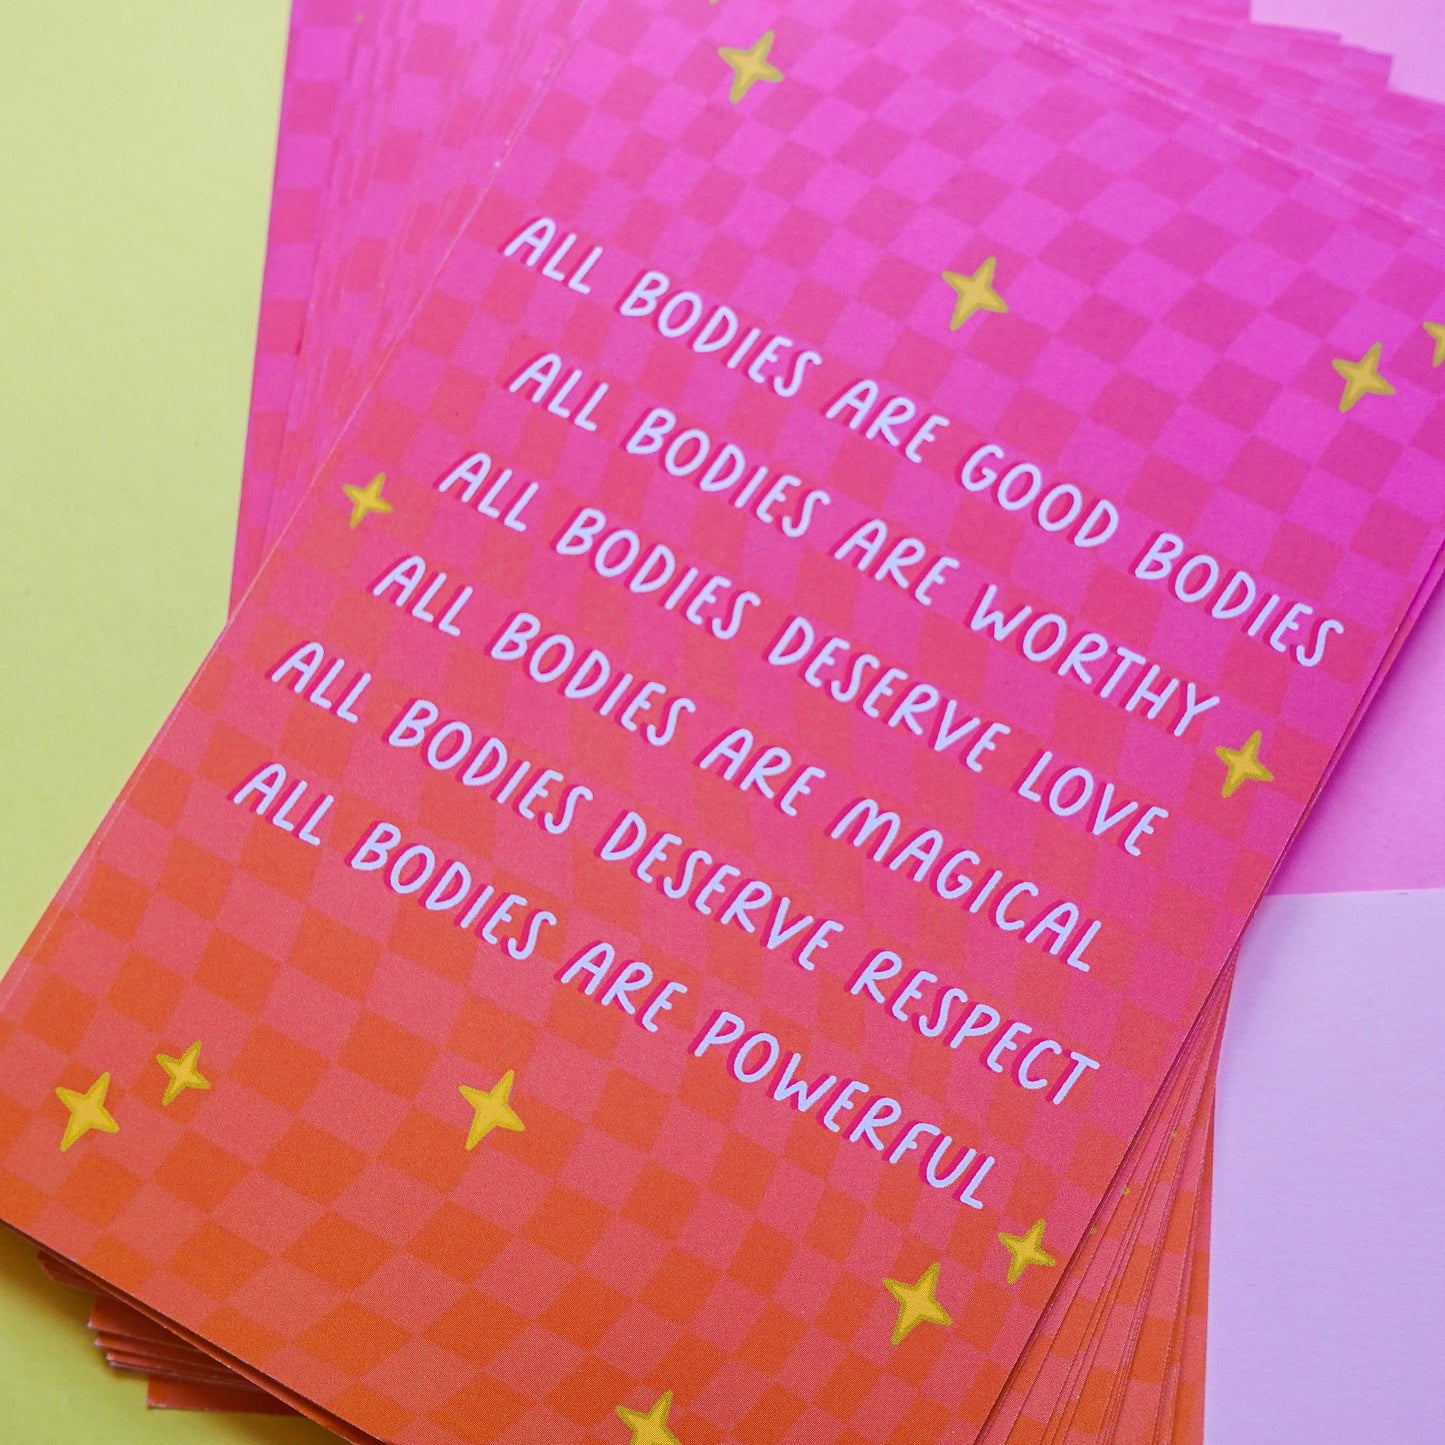 Gold Foiled All Bodies are Good Bodies Double-Sided Print